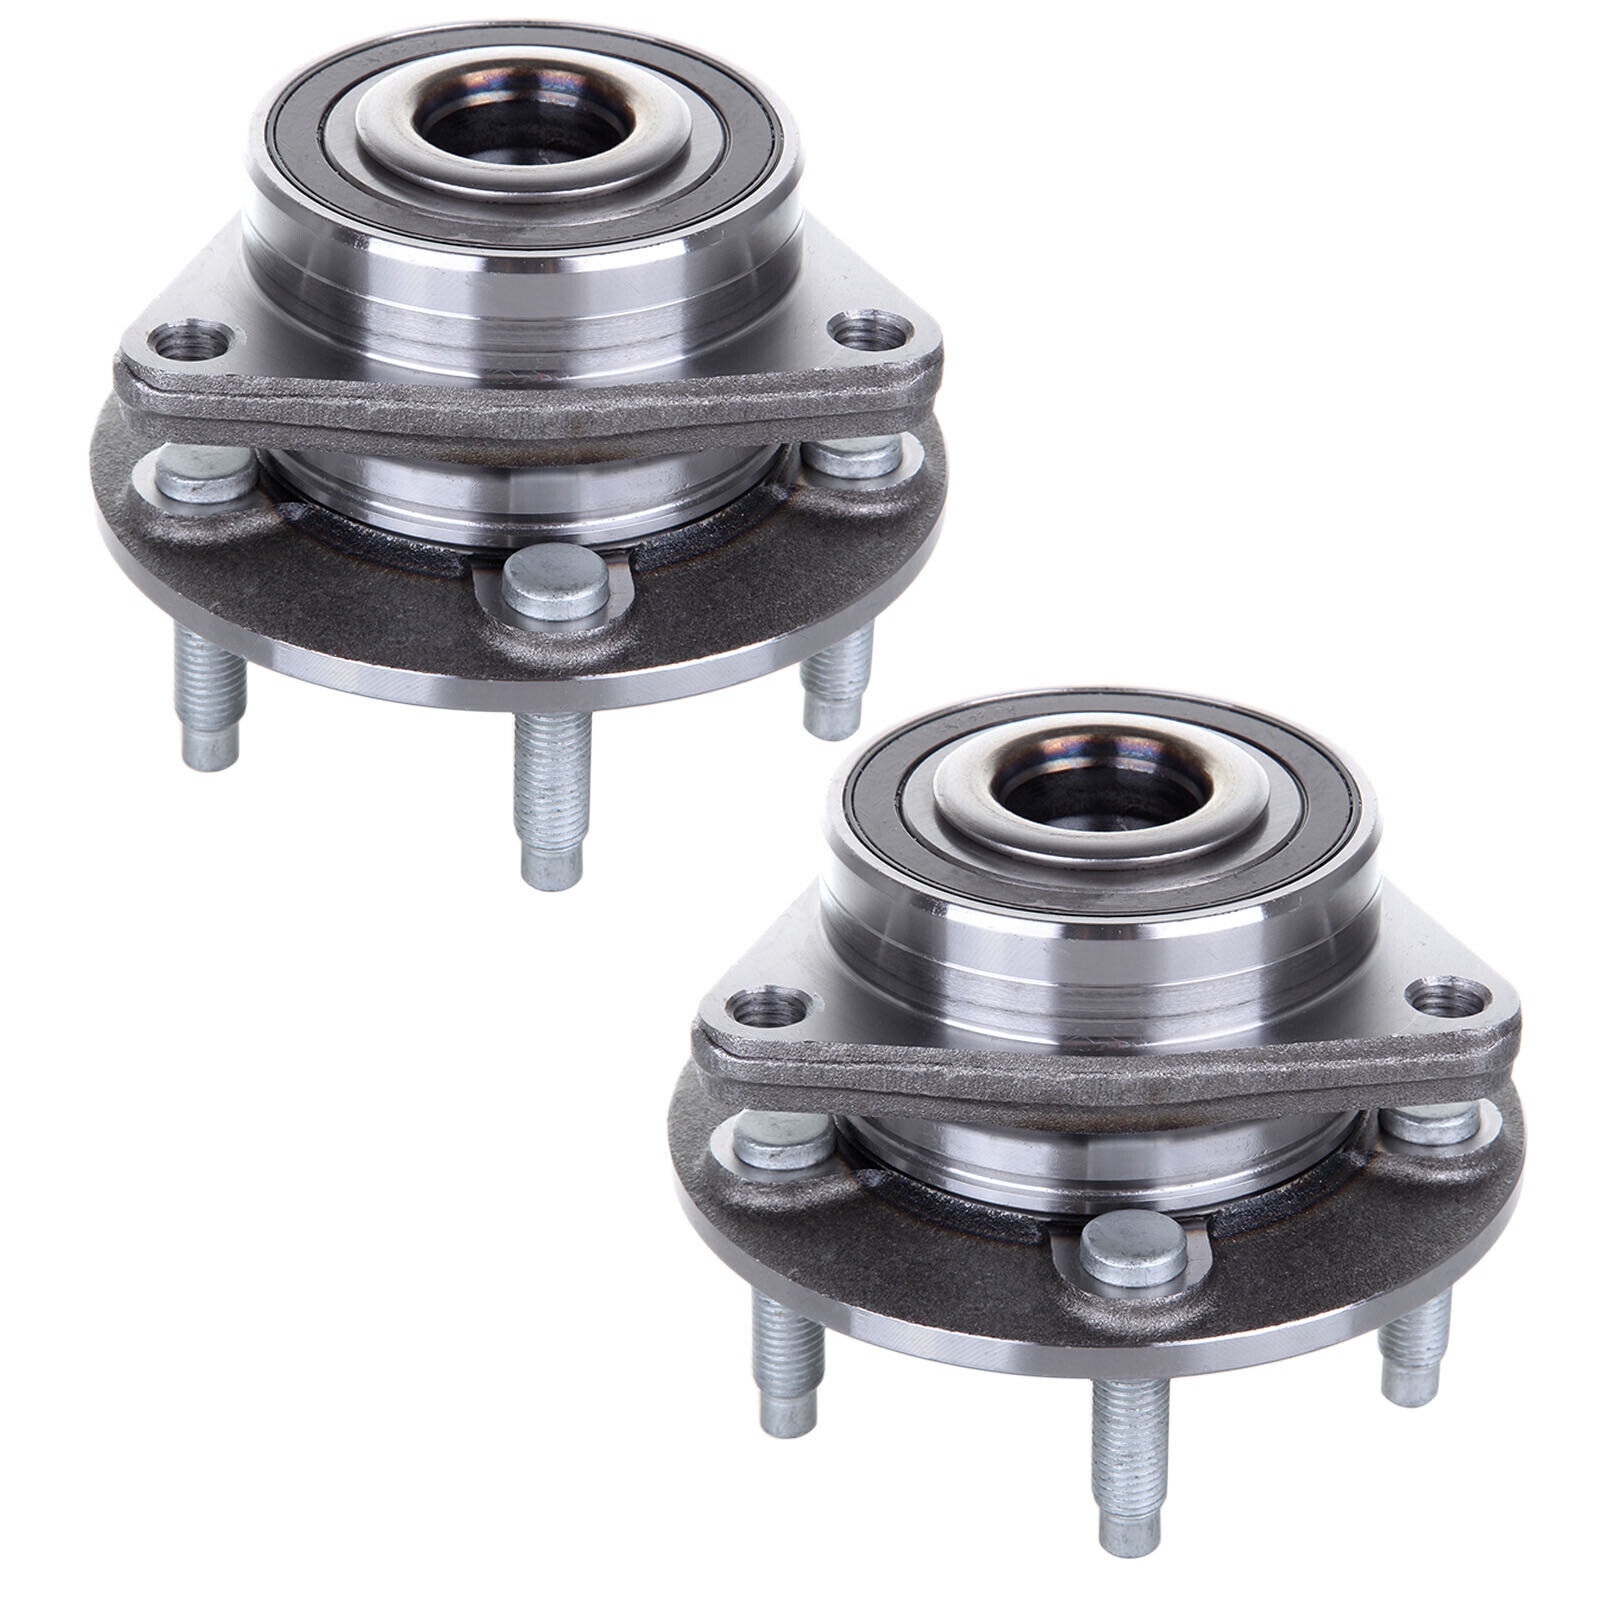 2x Front  Left Wheel Hub & Bearings For 2011-15 Chevy Cruze 2016 Limited 513315